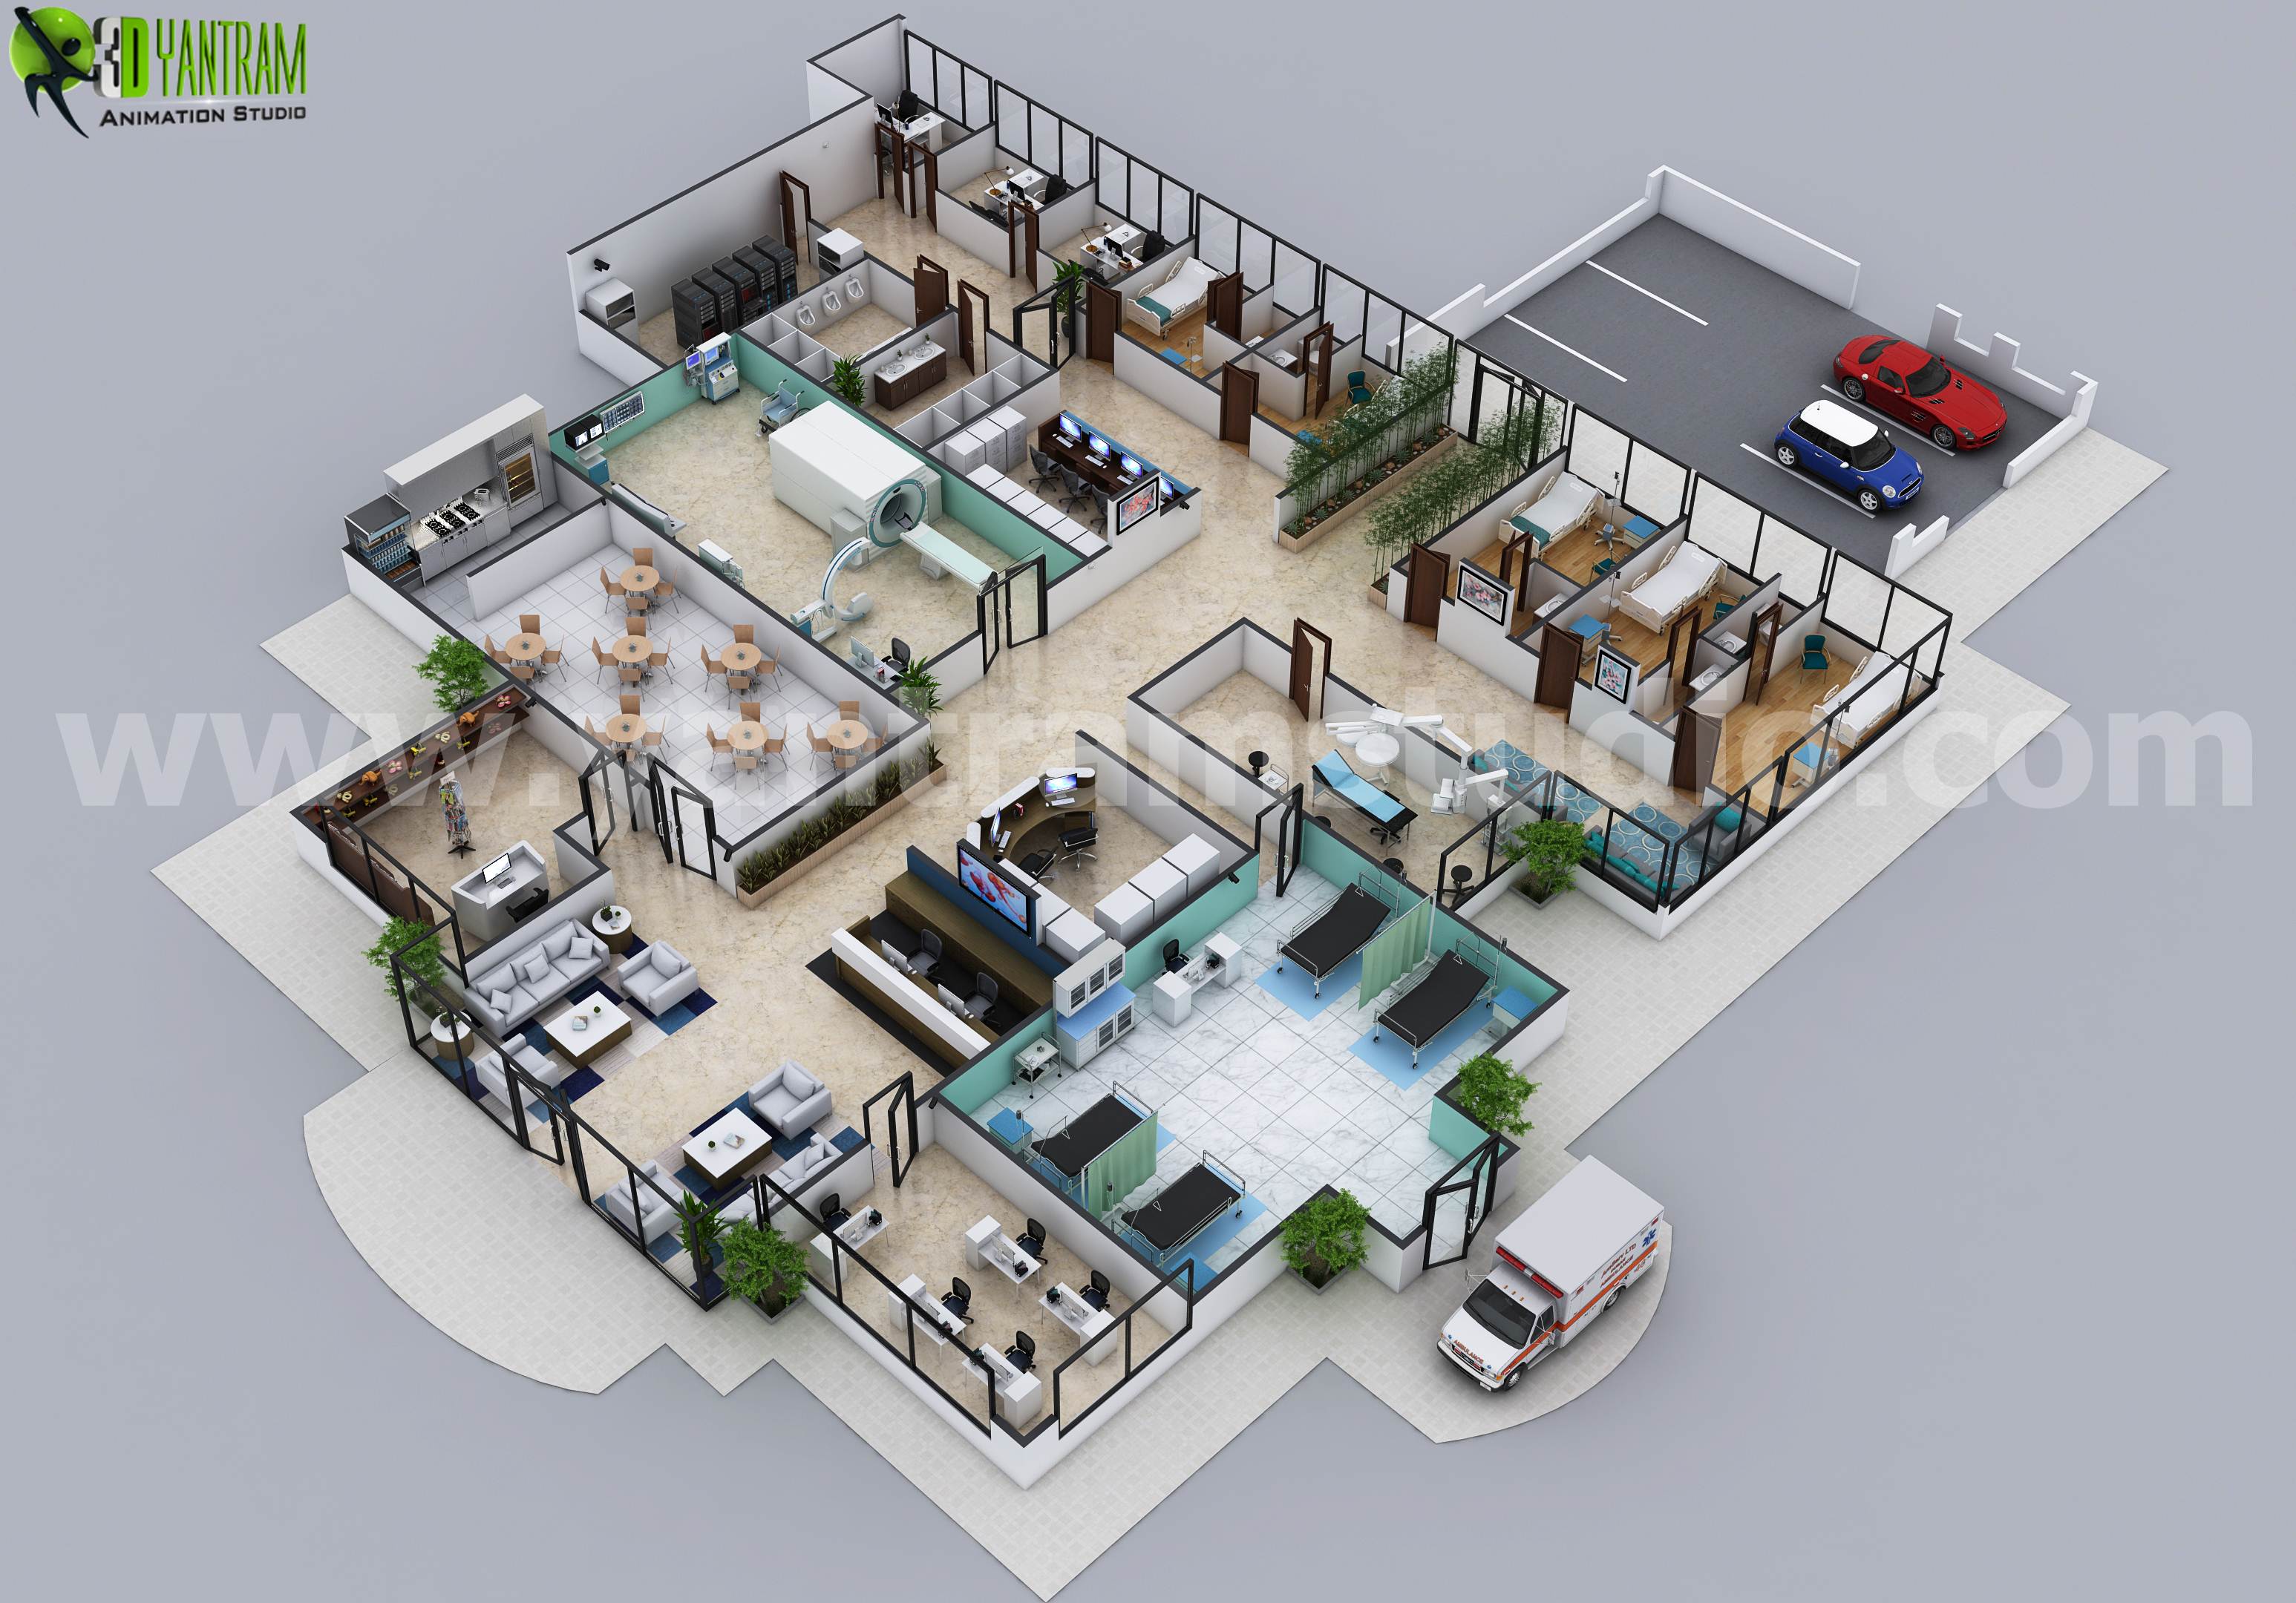 3D Hospital Floor Plan Layout Design by Yantram 3d floor plan software Chicago, USA - Hospital Floor plan is one of our concept design where we had developed everything which a multi specialist hospital needs, every area developed according to size and facility needs.  by Yantramarchitecturaldesignstudio